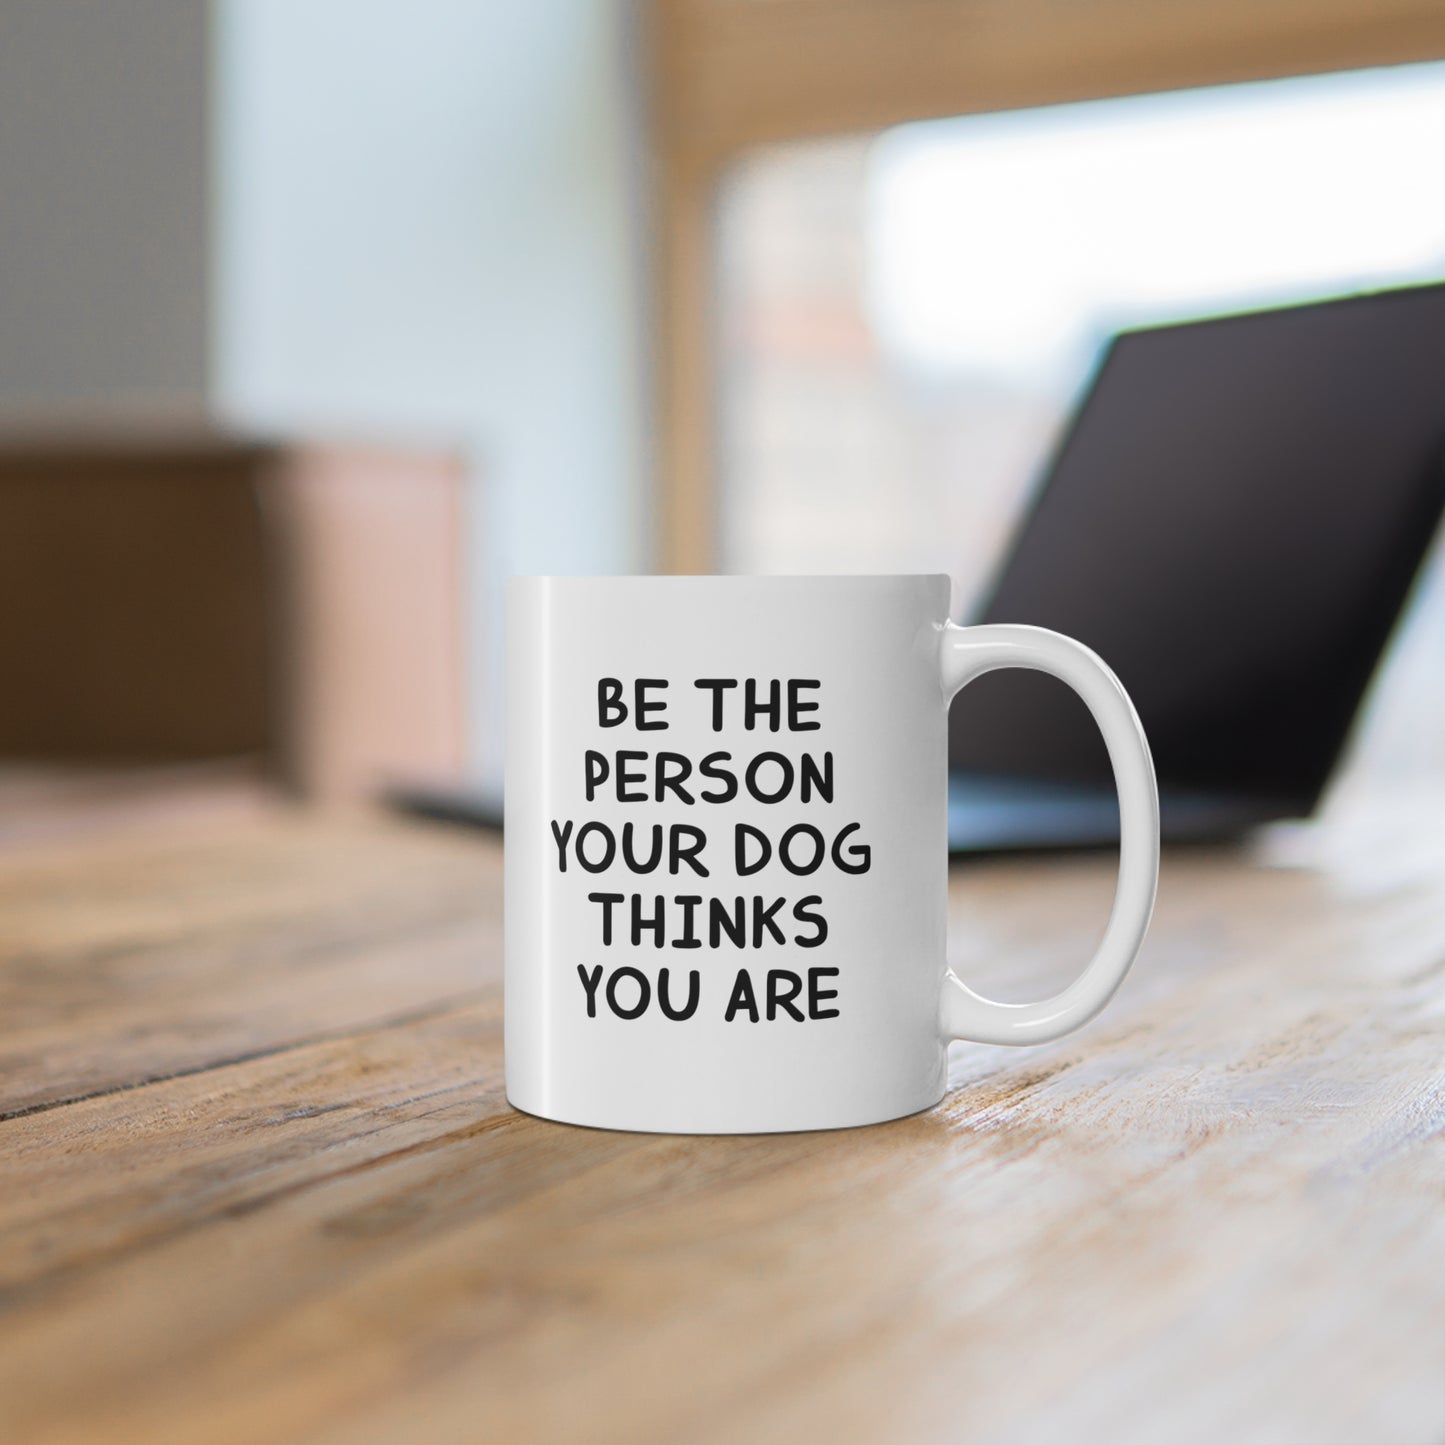 11oz ceramic mug with quote Be the person your dog thinks you are